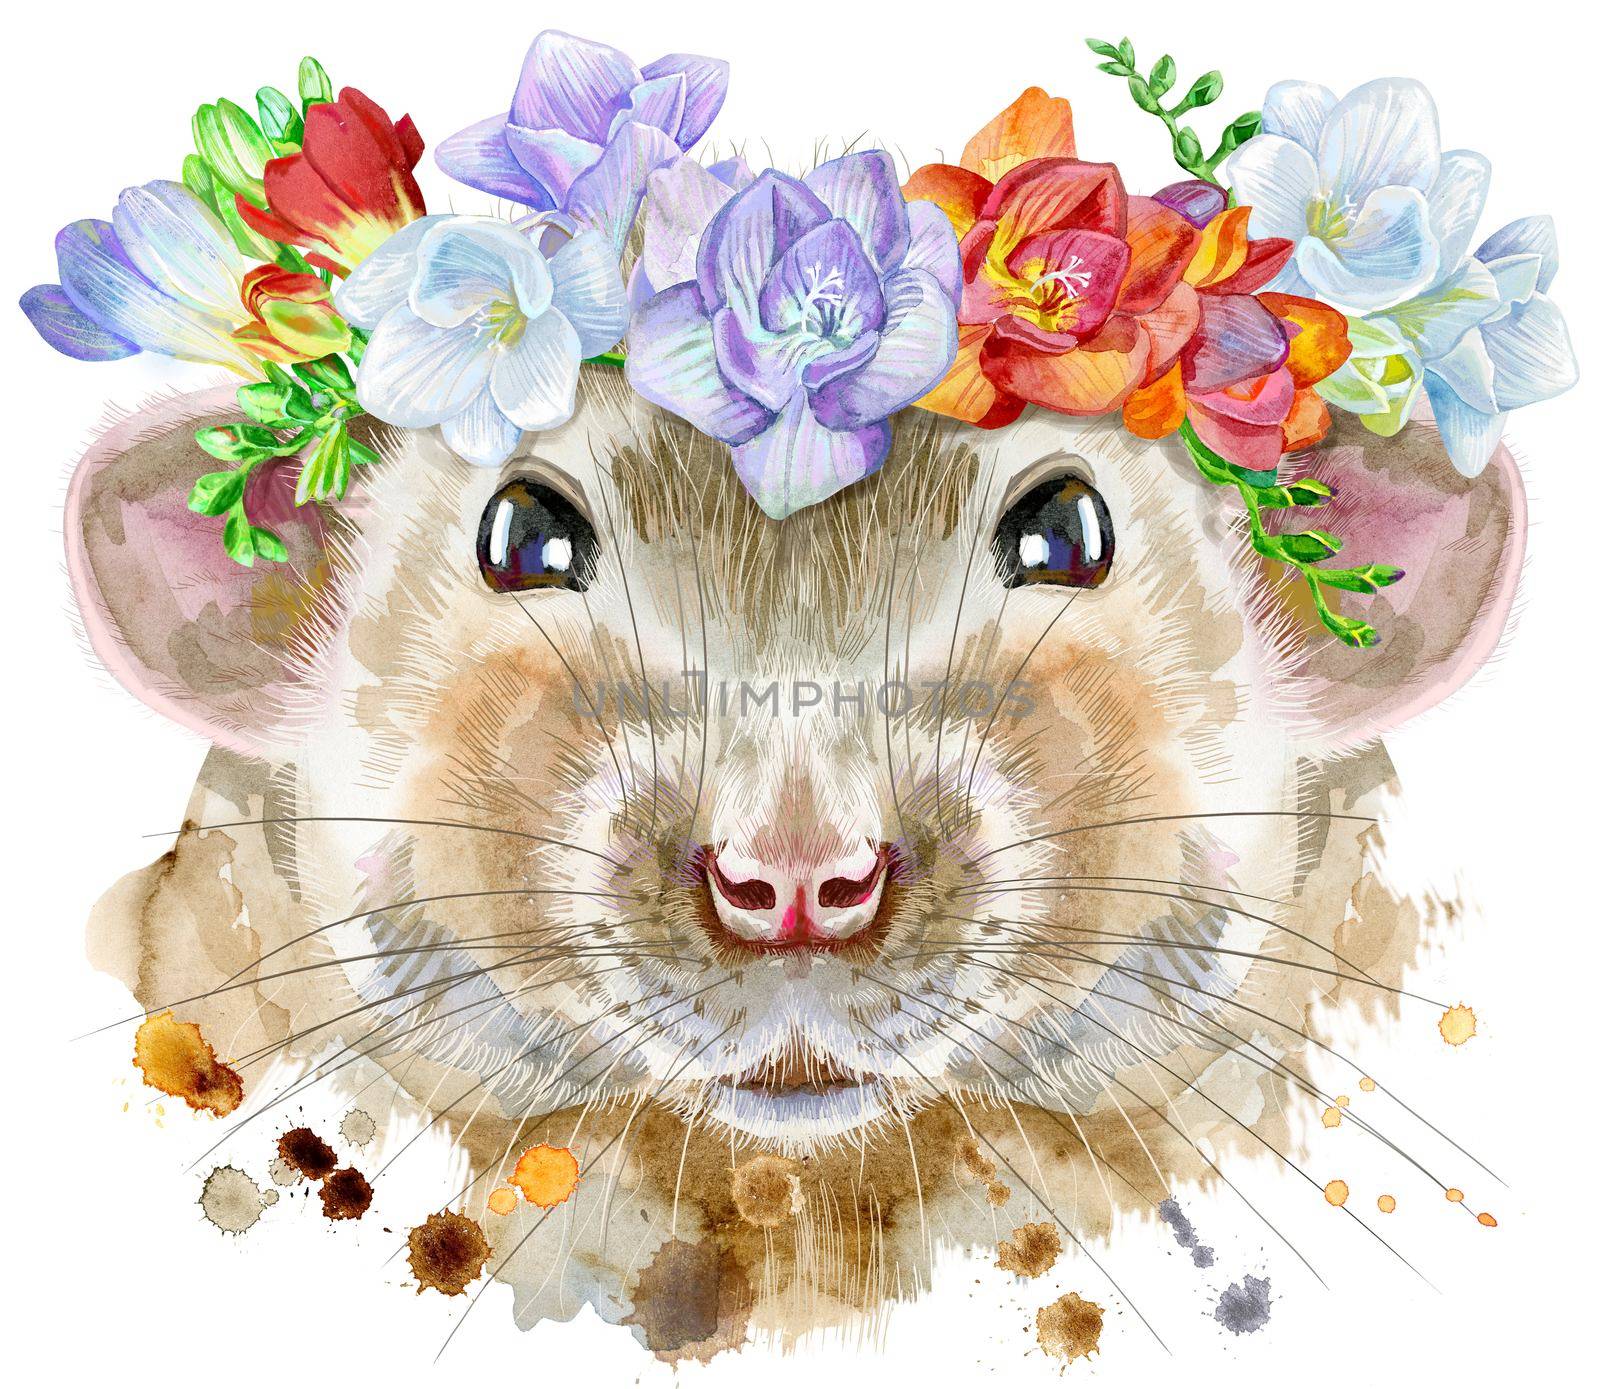 Watercolor portrait of white rat with freesia and eucalyptus wreath by NataOmsk